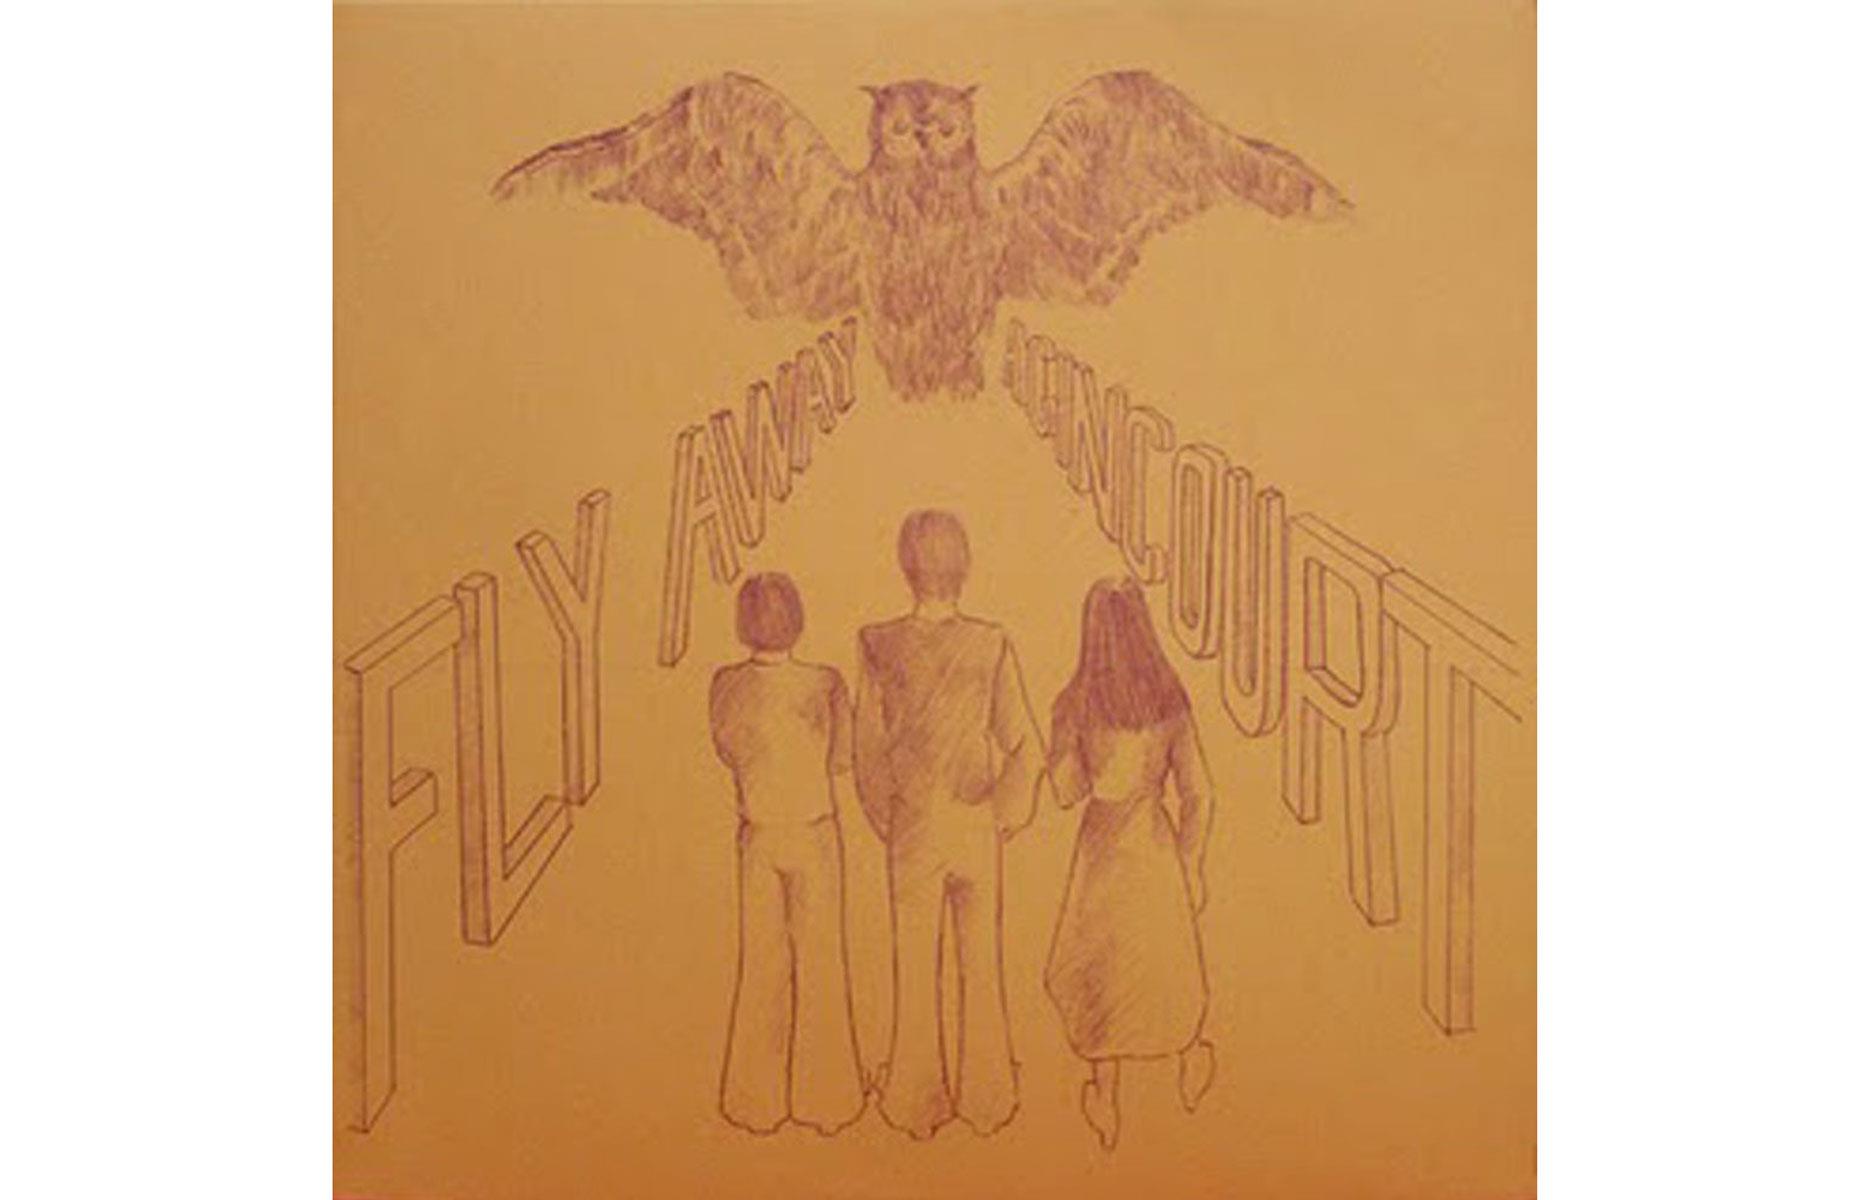 Agincourt – Fly Away: up to £1,700